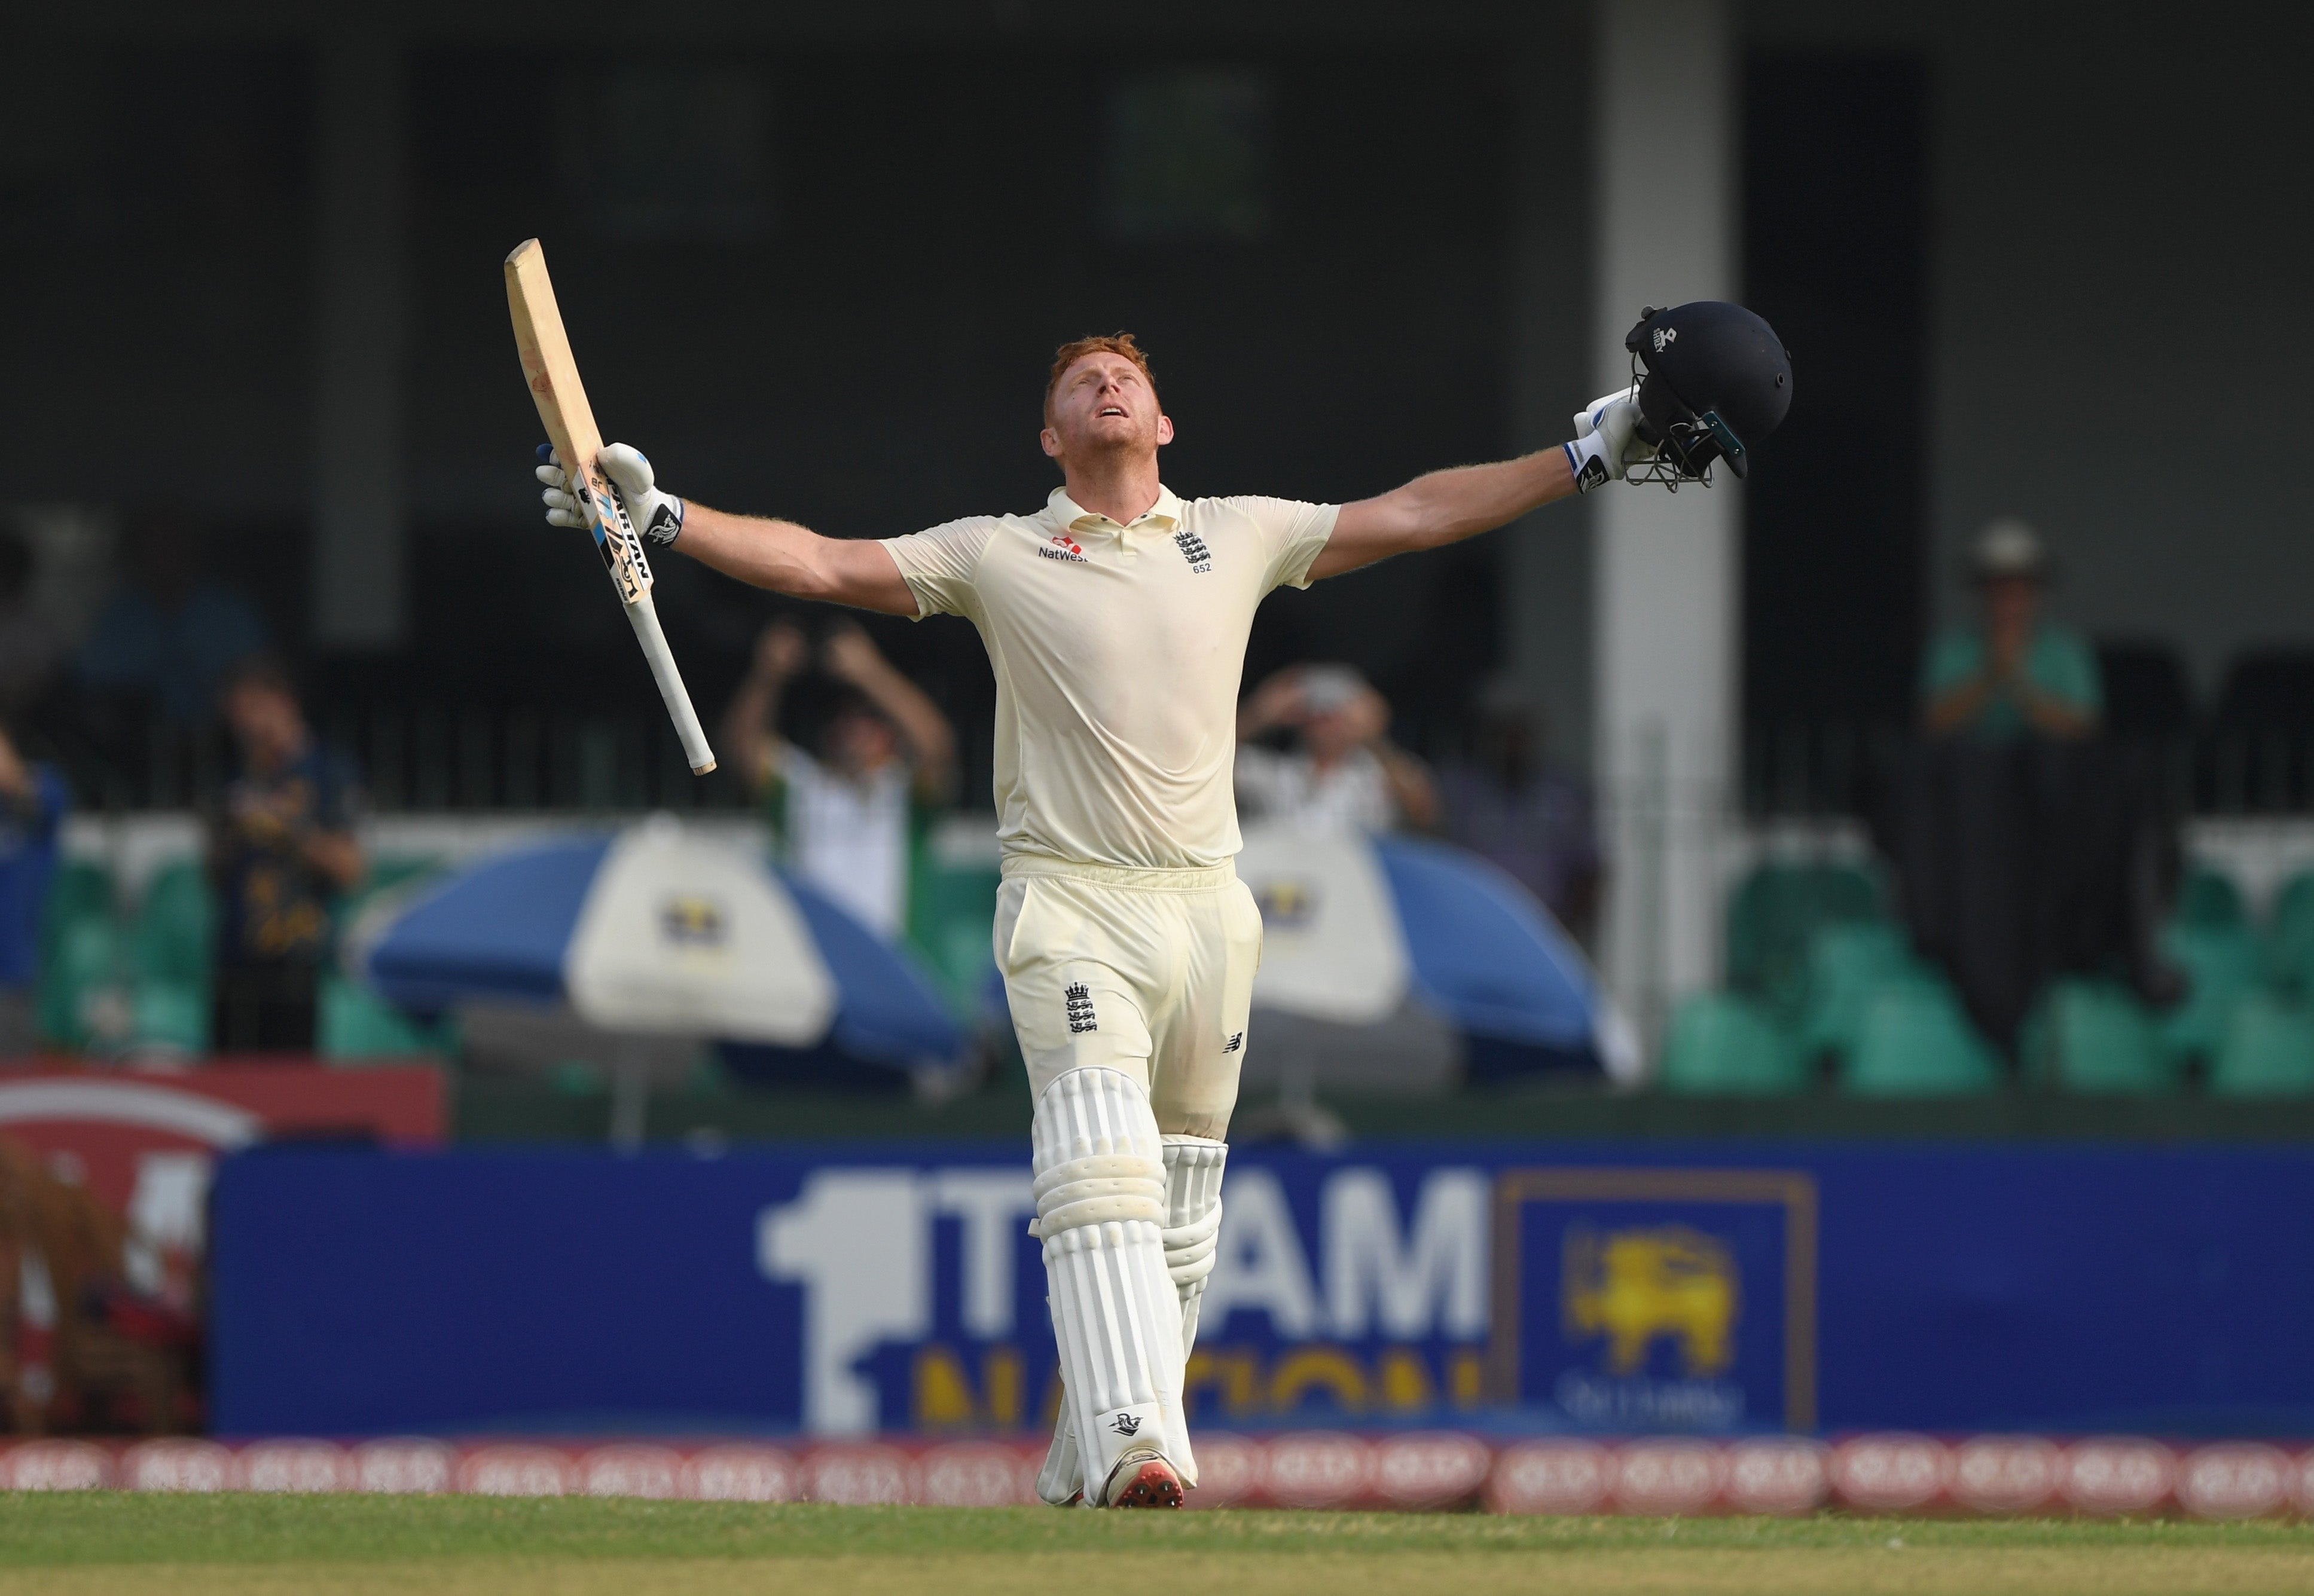 Jonny Bairstow fought his way back into the side before scoring a century at Colombo